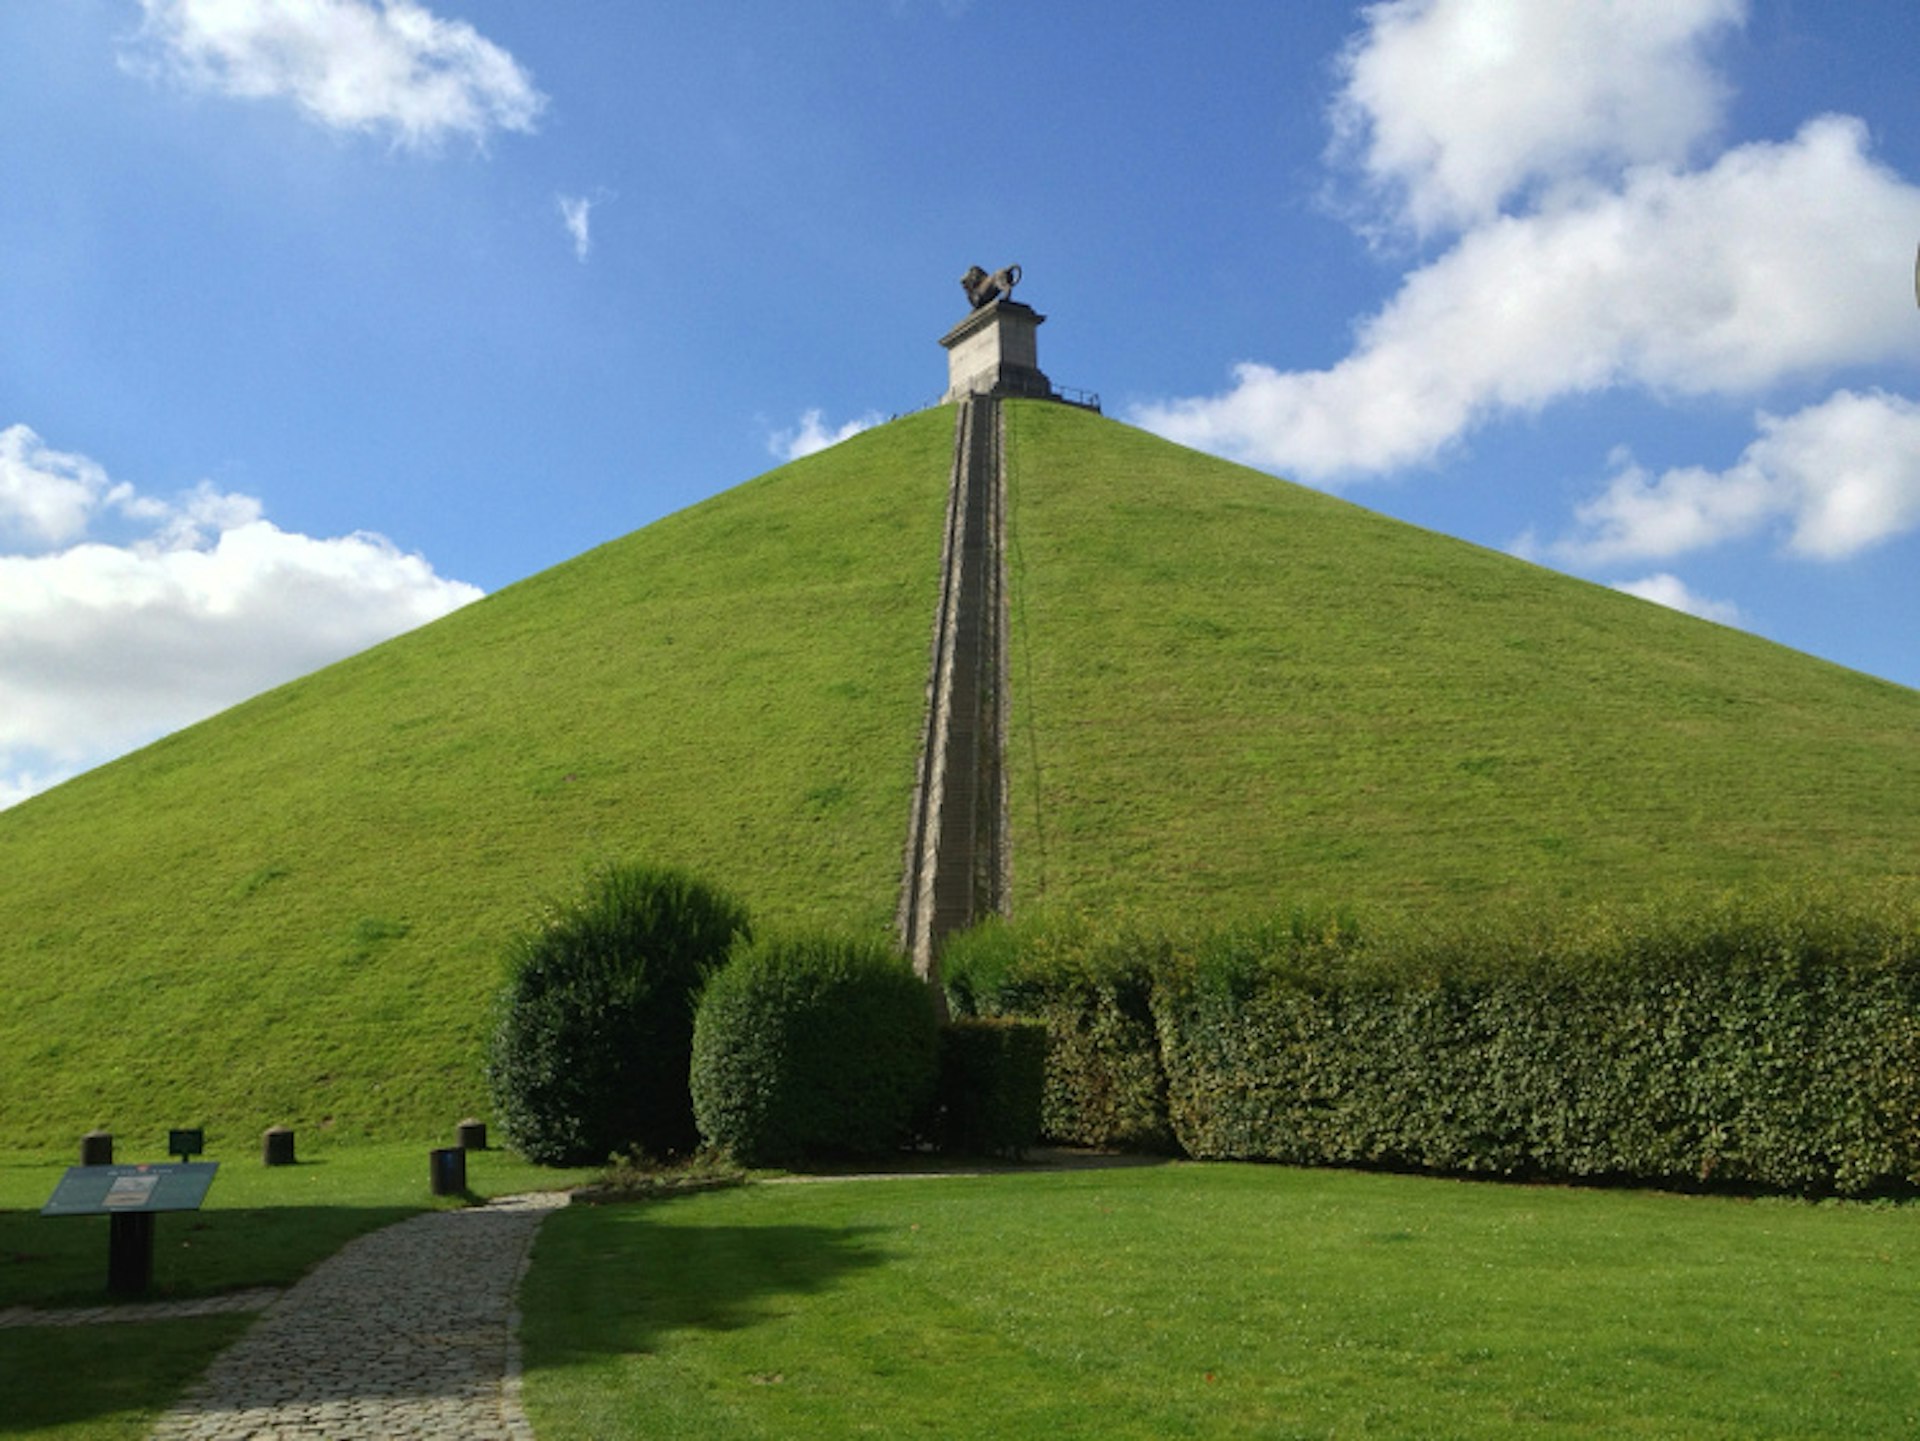 Lion Mound at the Waterloo Battlefield. Image by Tim Richards/Lonely Planet.